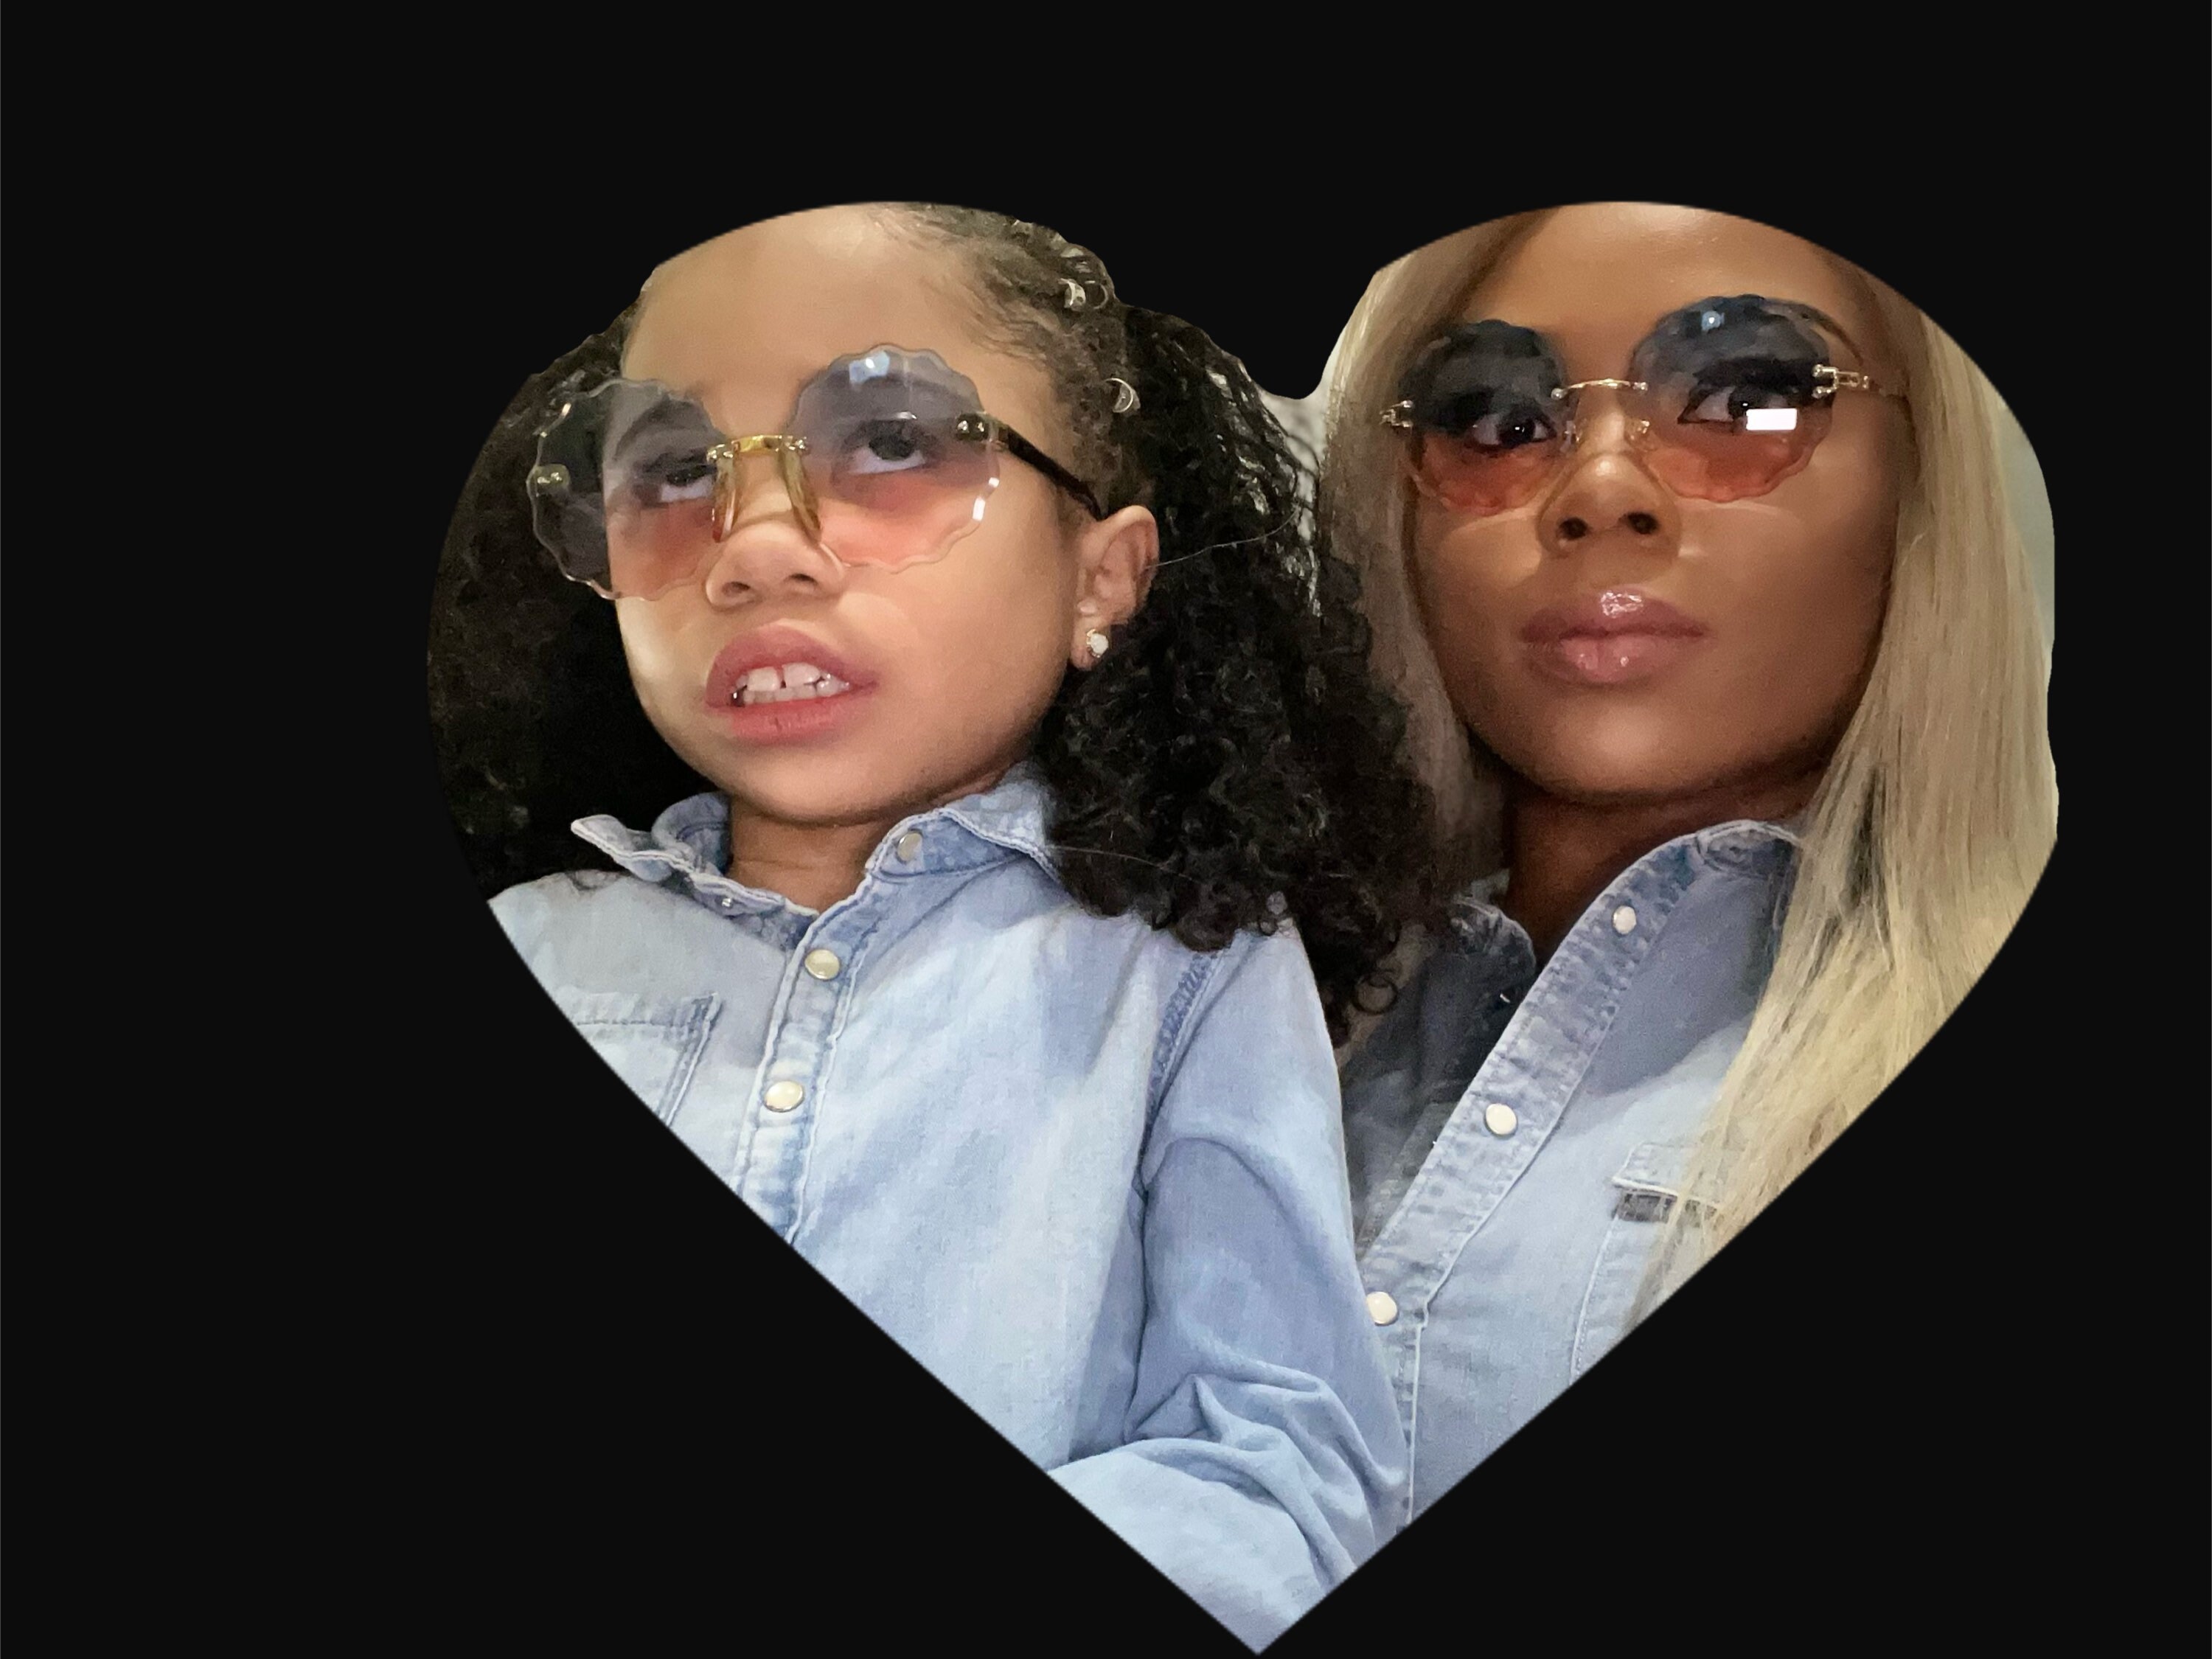 Mother and daughter Matching Style Sunglasses Heart Shaped Sunglasses for Women and Kids Girls 